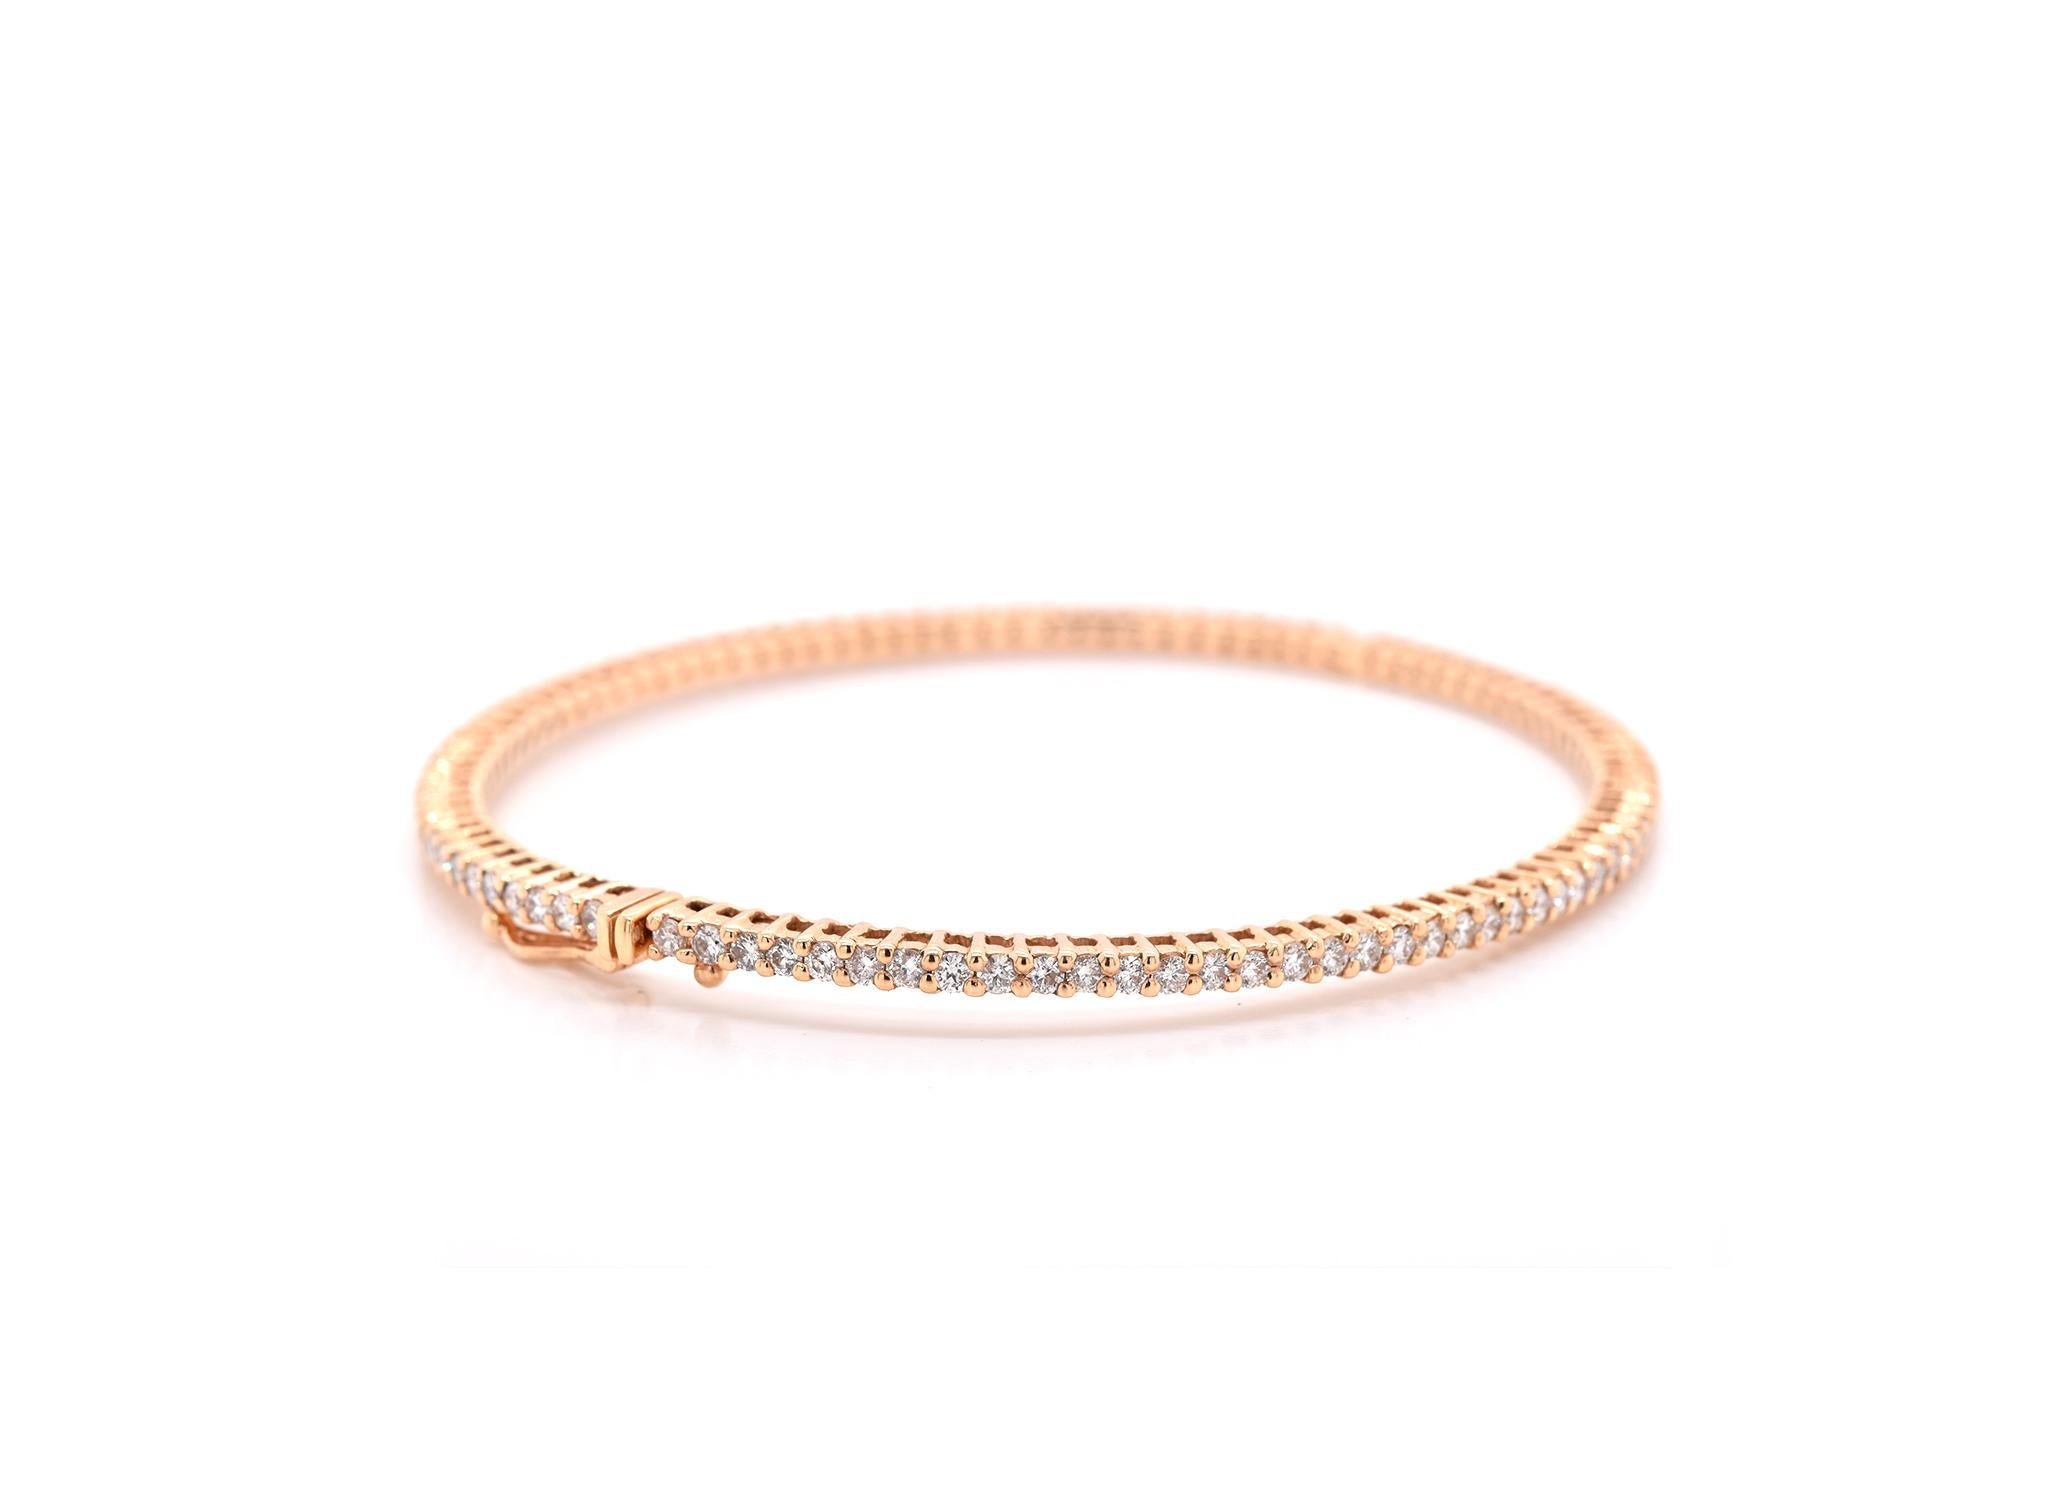 Material: 18k rose gold
Diamonds: 100 round brilliant cuts = 2.02cttw
Color: G
Clarity: VS
Dimensions: bracelet measures 7-inches in length
Weight: 10.4 grams

